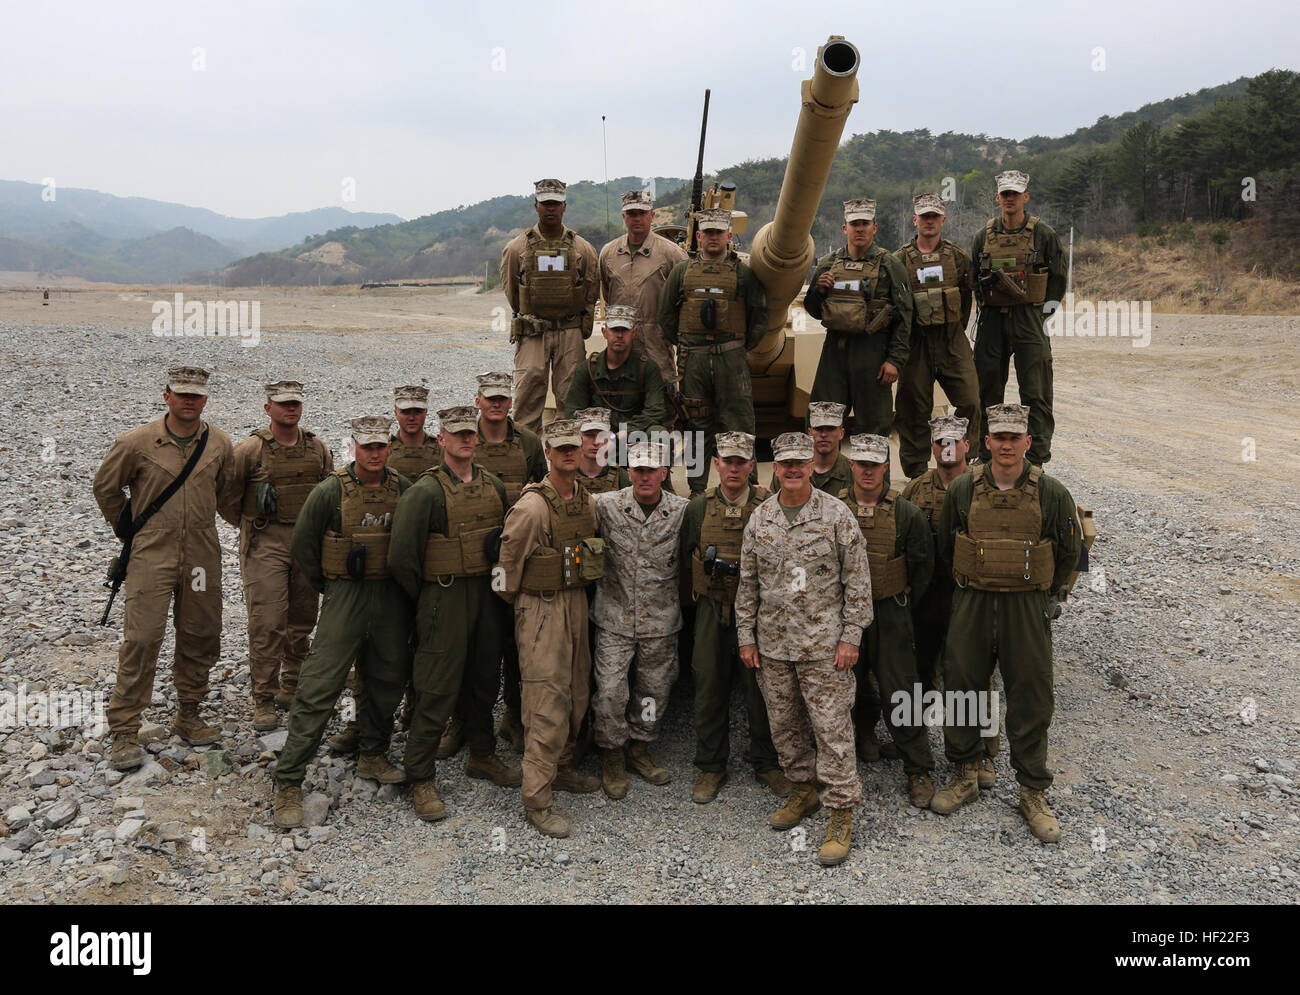 Maj. Gen. James S. Hartsell and Sgt. Maj. Bradley Kasal, Commanding General and Sergenat Major of 4th Marine Division, pose for a photo with Marine with Charlie Company, 4th Tanks Battalion, participating in exercise Ssang Yong, Pohang, South Korea,  April 3, 2014. Exercise Ssang Yong is conducted annually in the ROK to enhance interoperability between U.S. and ROK forces by performing a full spectrum of amphibious operations while showcasing sea-based power projection in the Pacific. (U.S. Marine Corps photo by Cpl. Lauren Whitney/Released) 4th Marine Division leaders visit, Ssang Yong 14 140 Stock Photo